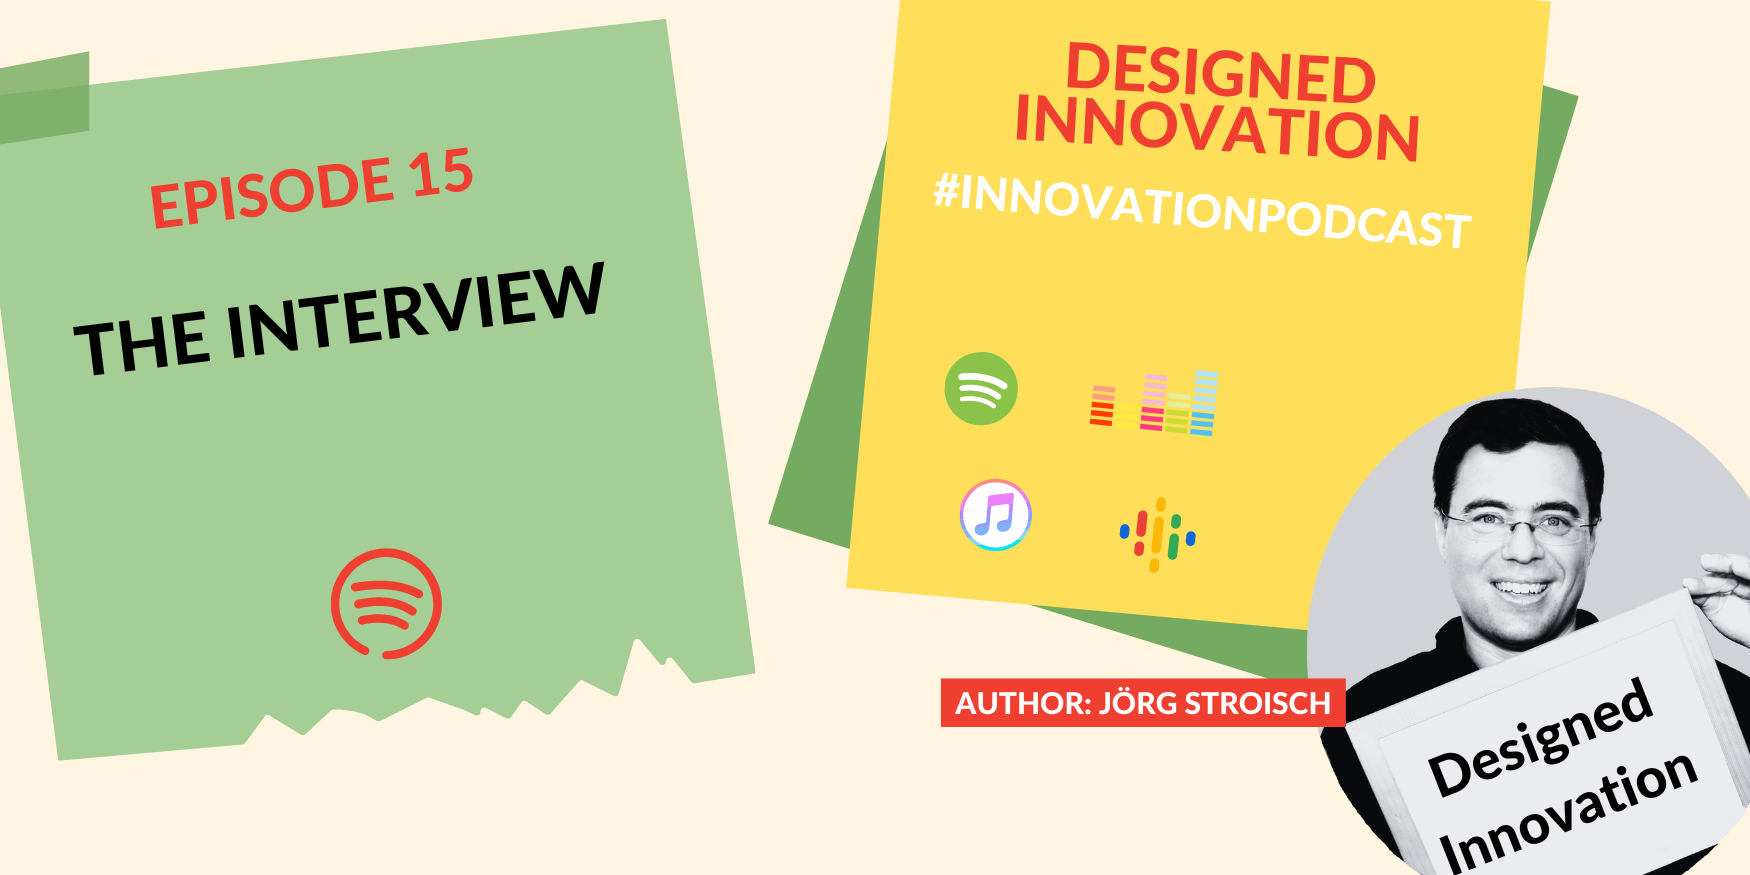 How to conduct insights through interviews? A new episode of my podcast Designed Innovation.